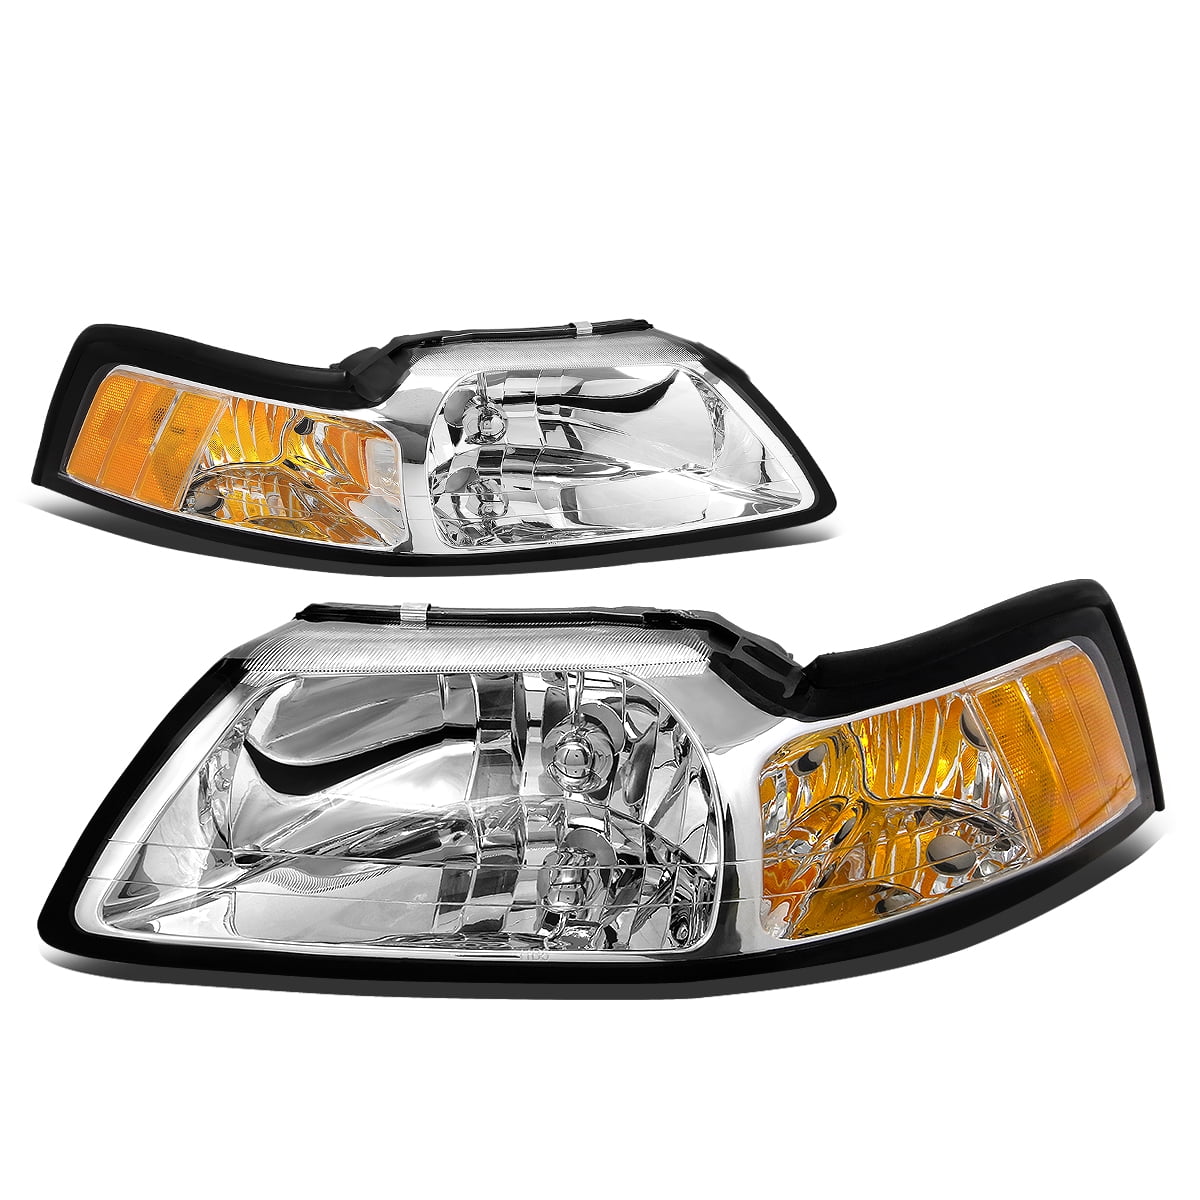 DNA Motoring OEM-HL-0036-L Factory Style Driver/Left Side Headlight Lamp Assembly Replacement